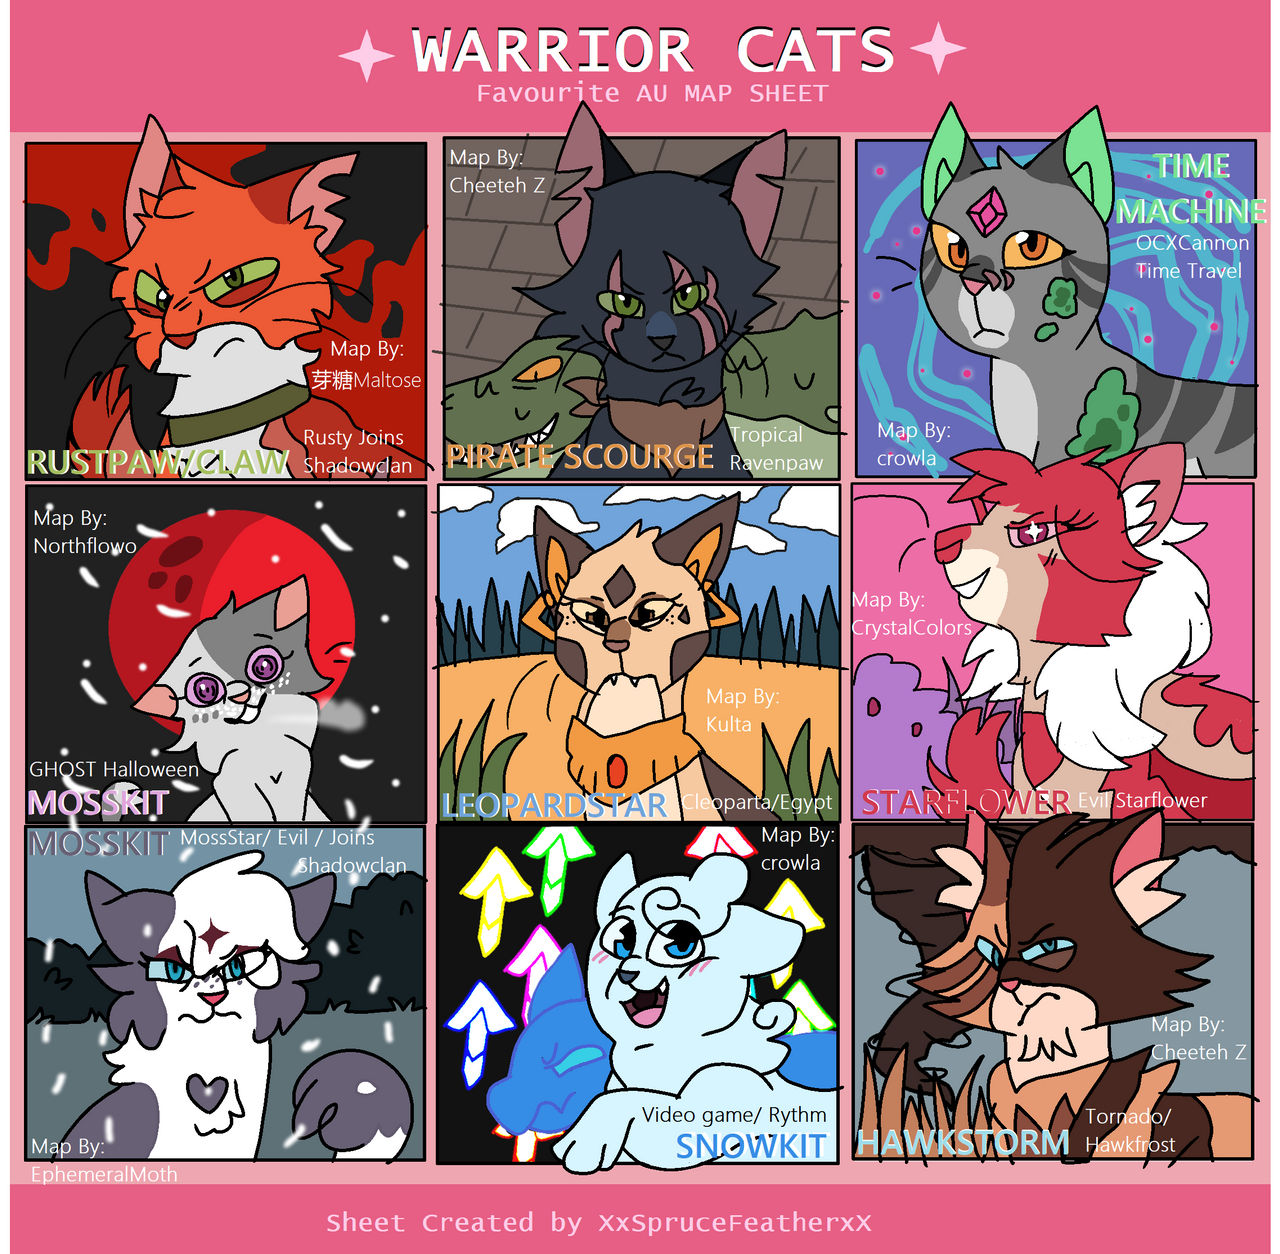 It's Alright - Ravenpaw Warrior Cats MAP COMPLETE - (Tw: Flash) 